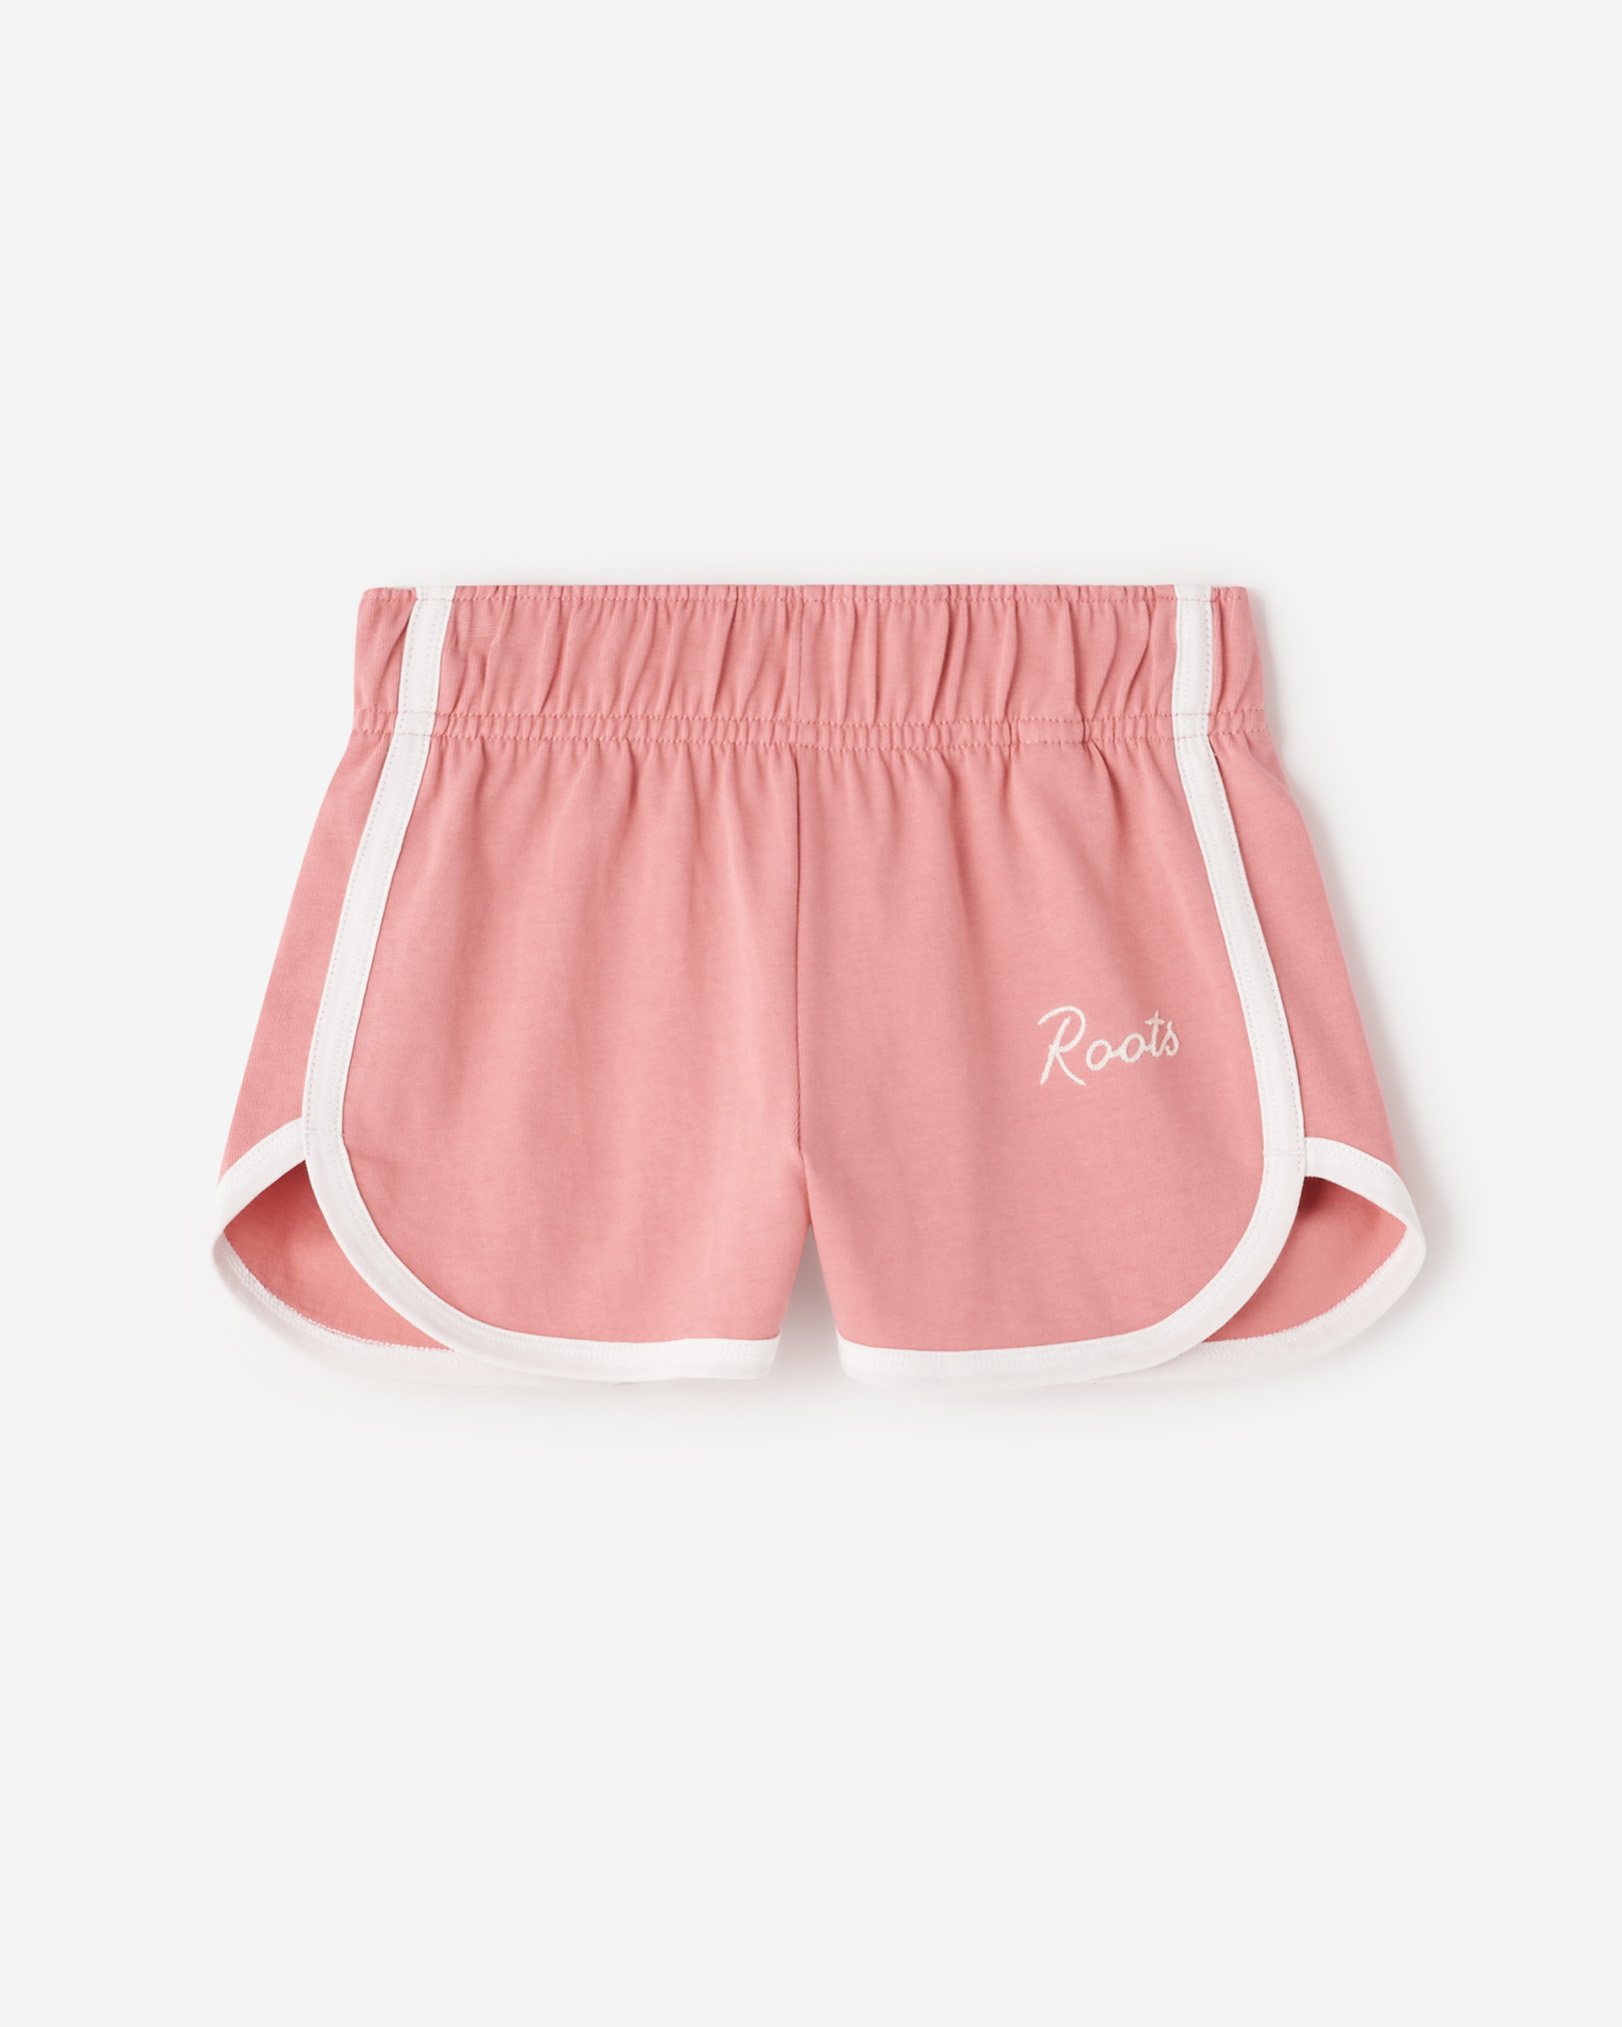 Roots Girl's Gym Short in Mauveglow